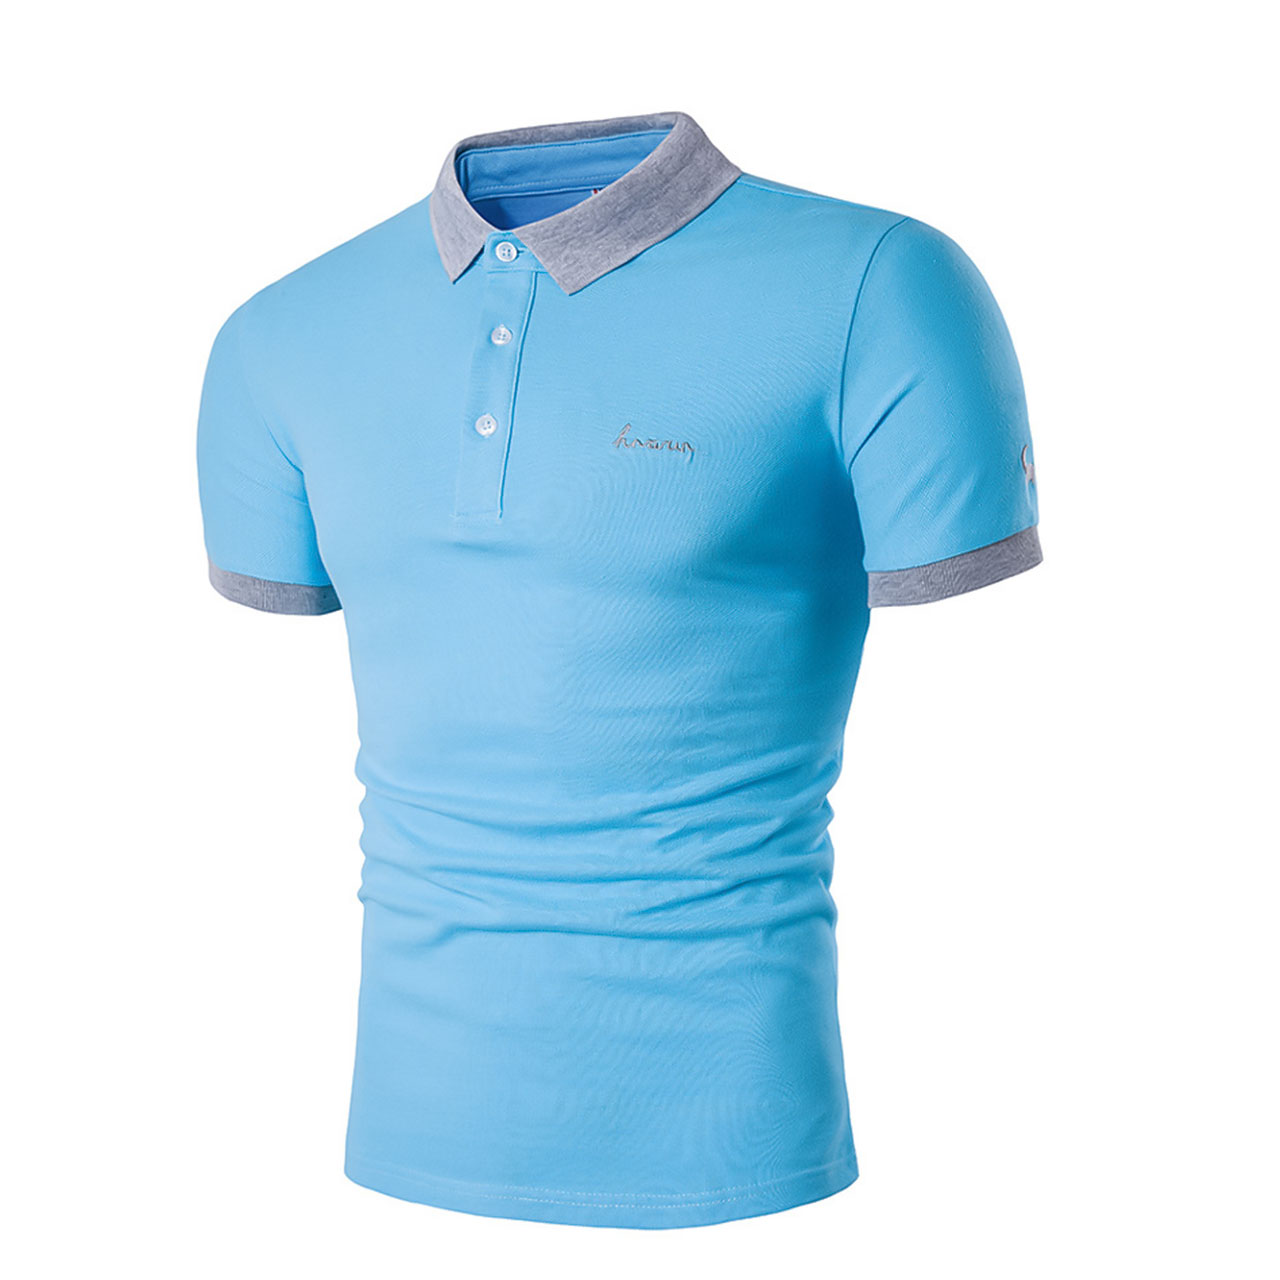 Solid Collared Active Cotton Daily Weekend Summer Slim Short Sleeve Light Blue Polo Shirt Men's 